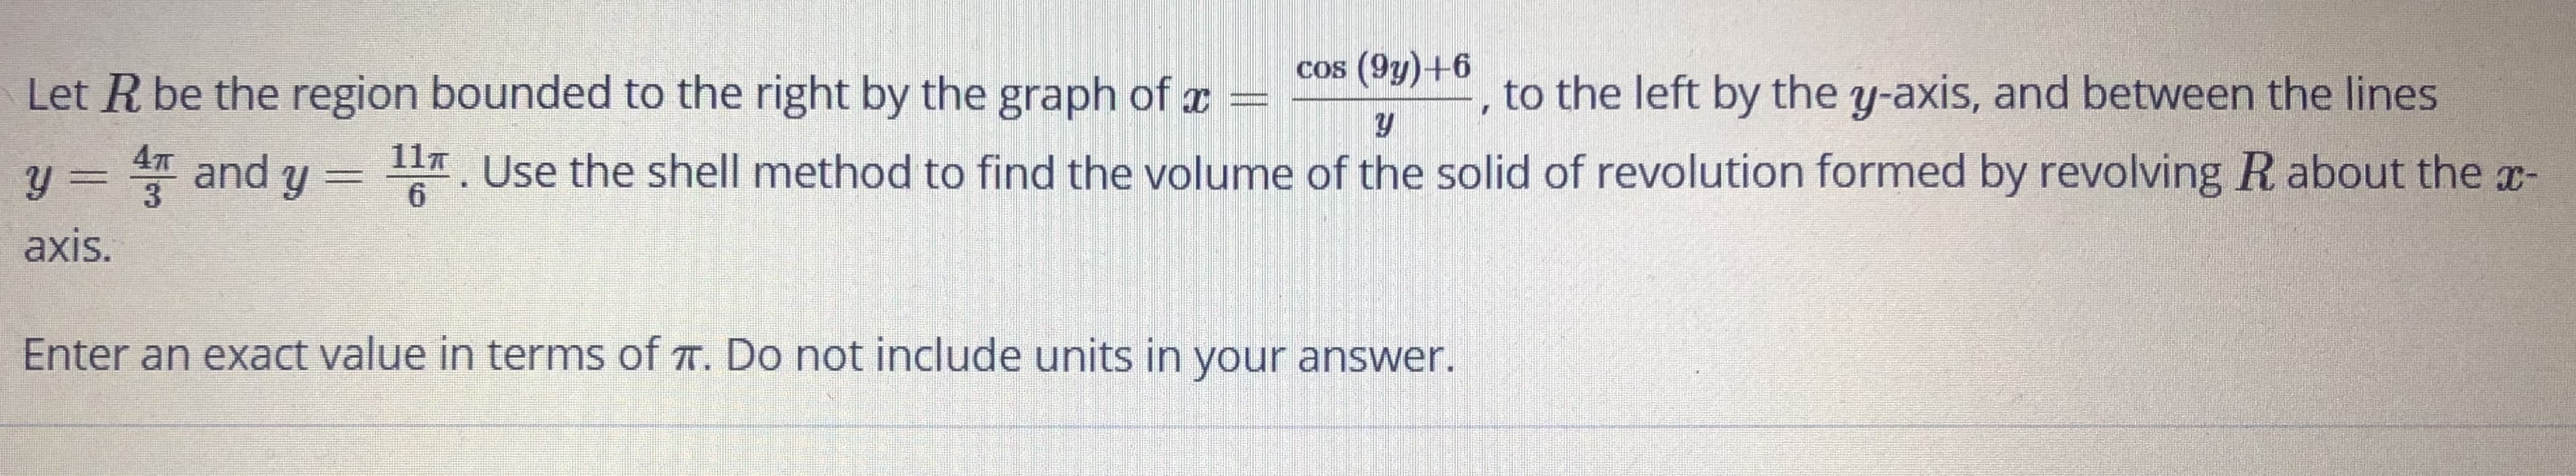 Cos (9y)+6
Let R be the region bounded to the right by the graph of x
to the left by the y-axis, and between the lines
11T
y = T and y = 7. Use the shell method to find the volume of the solid of revolution formed by revolving R about the x-
3
6.
axis.
Enter an exact value in terms of T. Do not include units in your answer.
